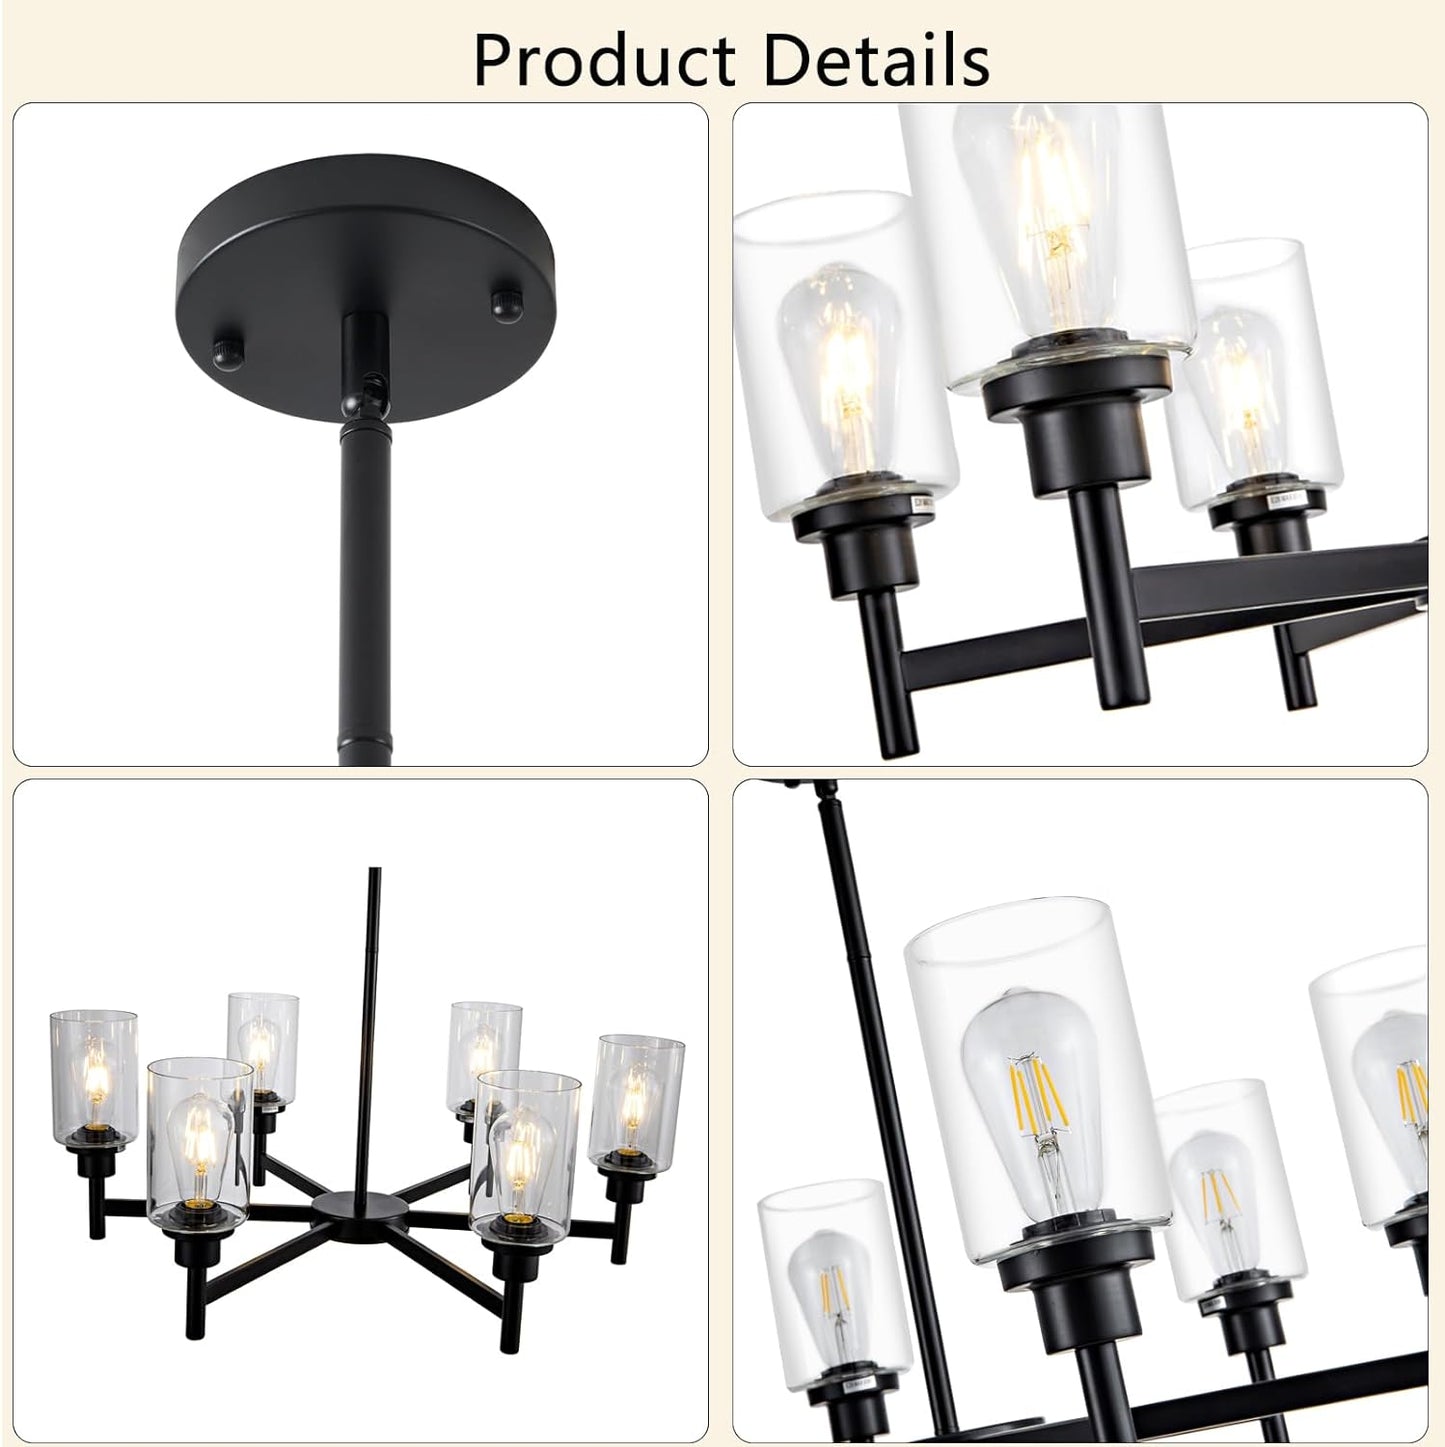 HCCZ 6 Light Farmhouse Chandelier Black Dining Room Light Fixture Over Table Industrial Hanging Pendant Lighting for Living Room Foyer Kitchen Island Adjustable Height E26 Socket with Glass Shad